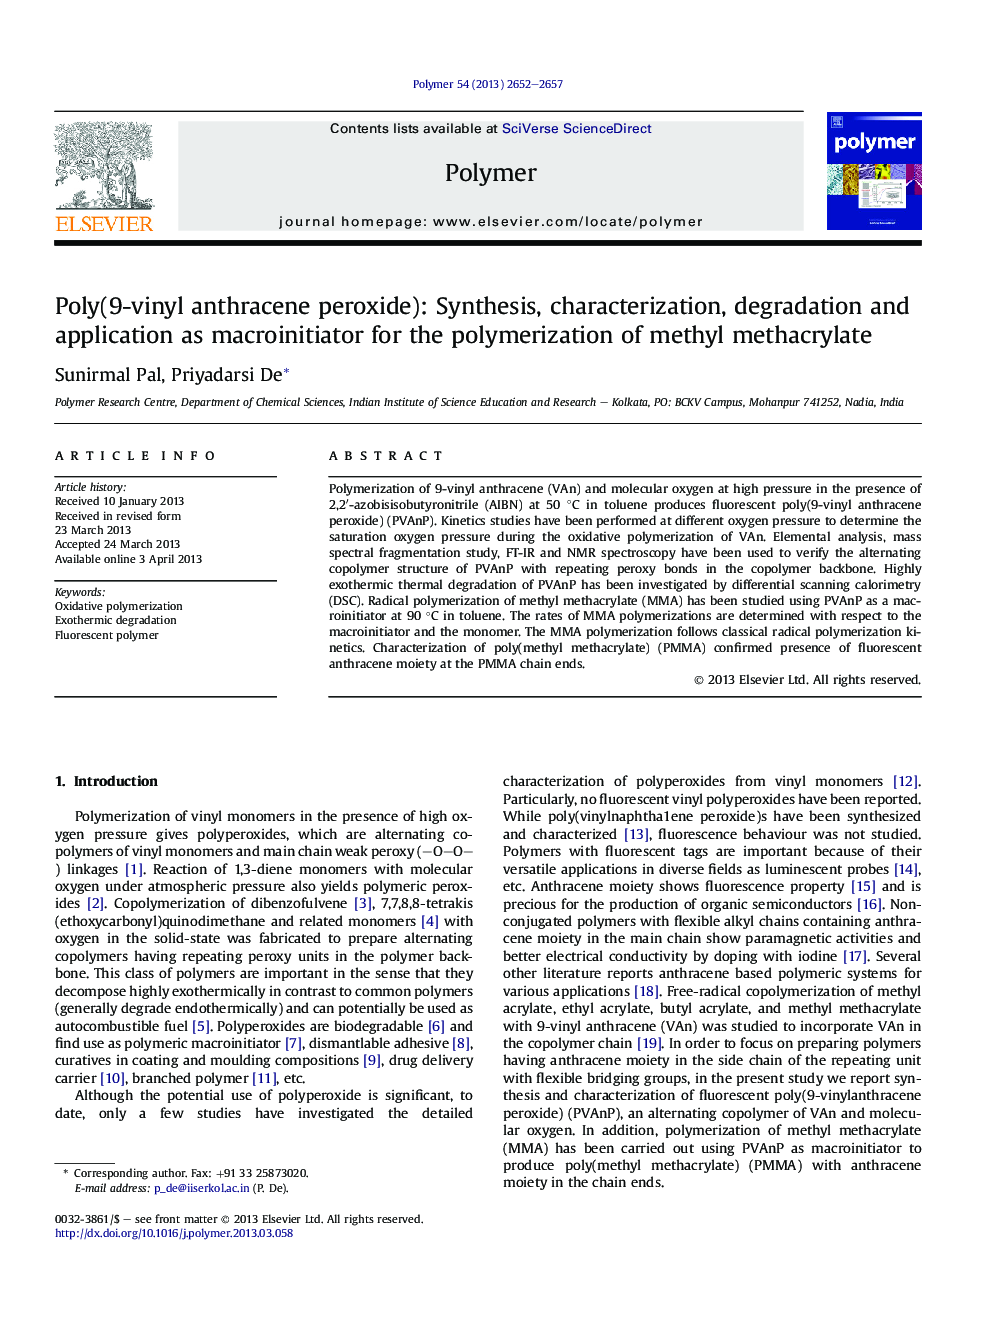 Poly(9-vinyl anthracene peroxide): Synthesis, characterization, degradation and application as macroinitiator for the polymerization of methyl methacrylate